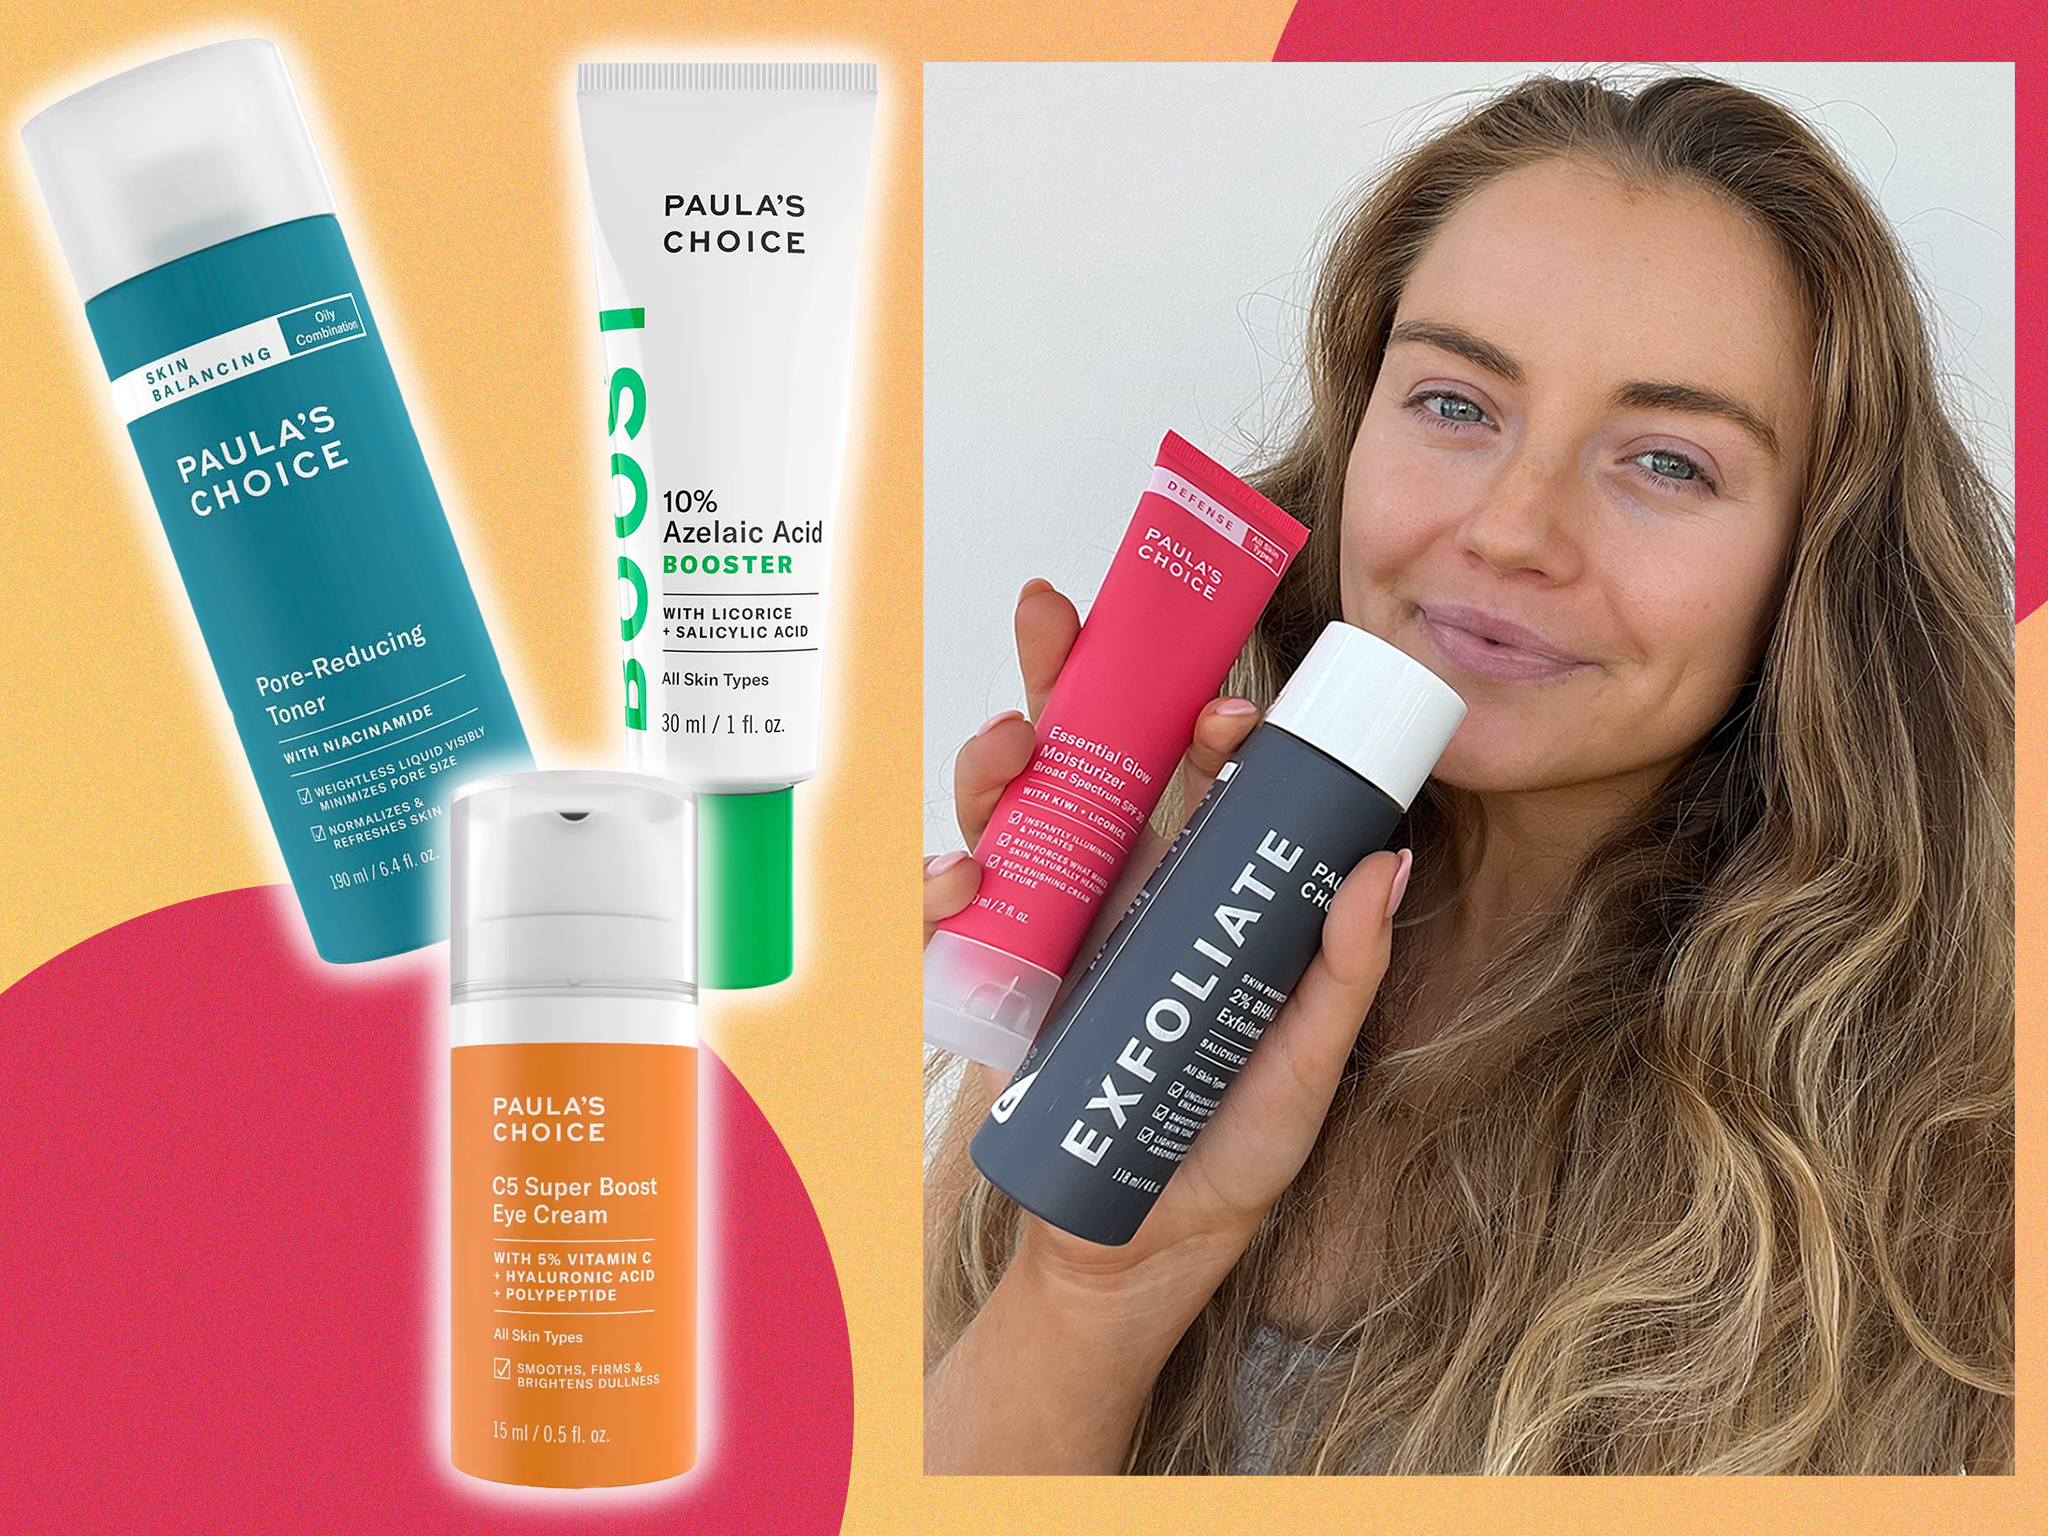 10 best Paula’s Choice skincare saviours tried and reviewed by our beauty buff